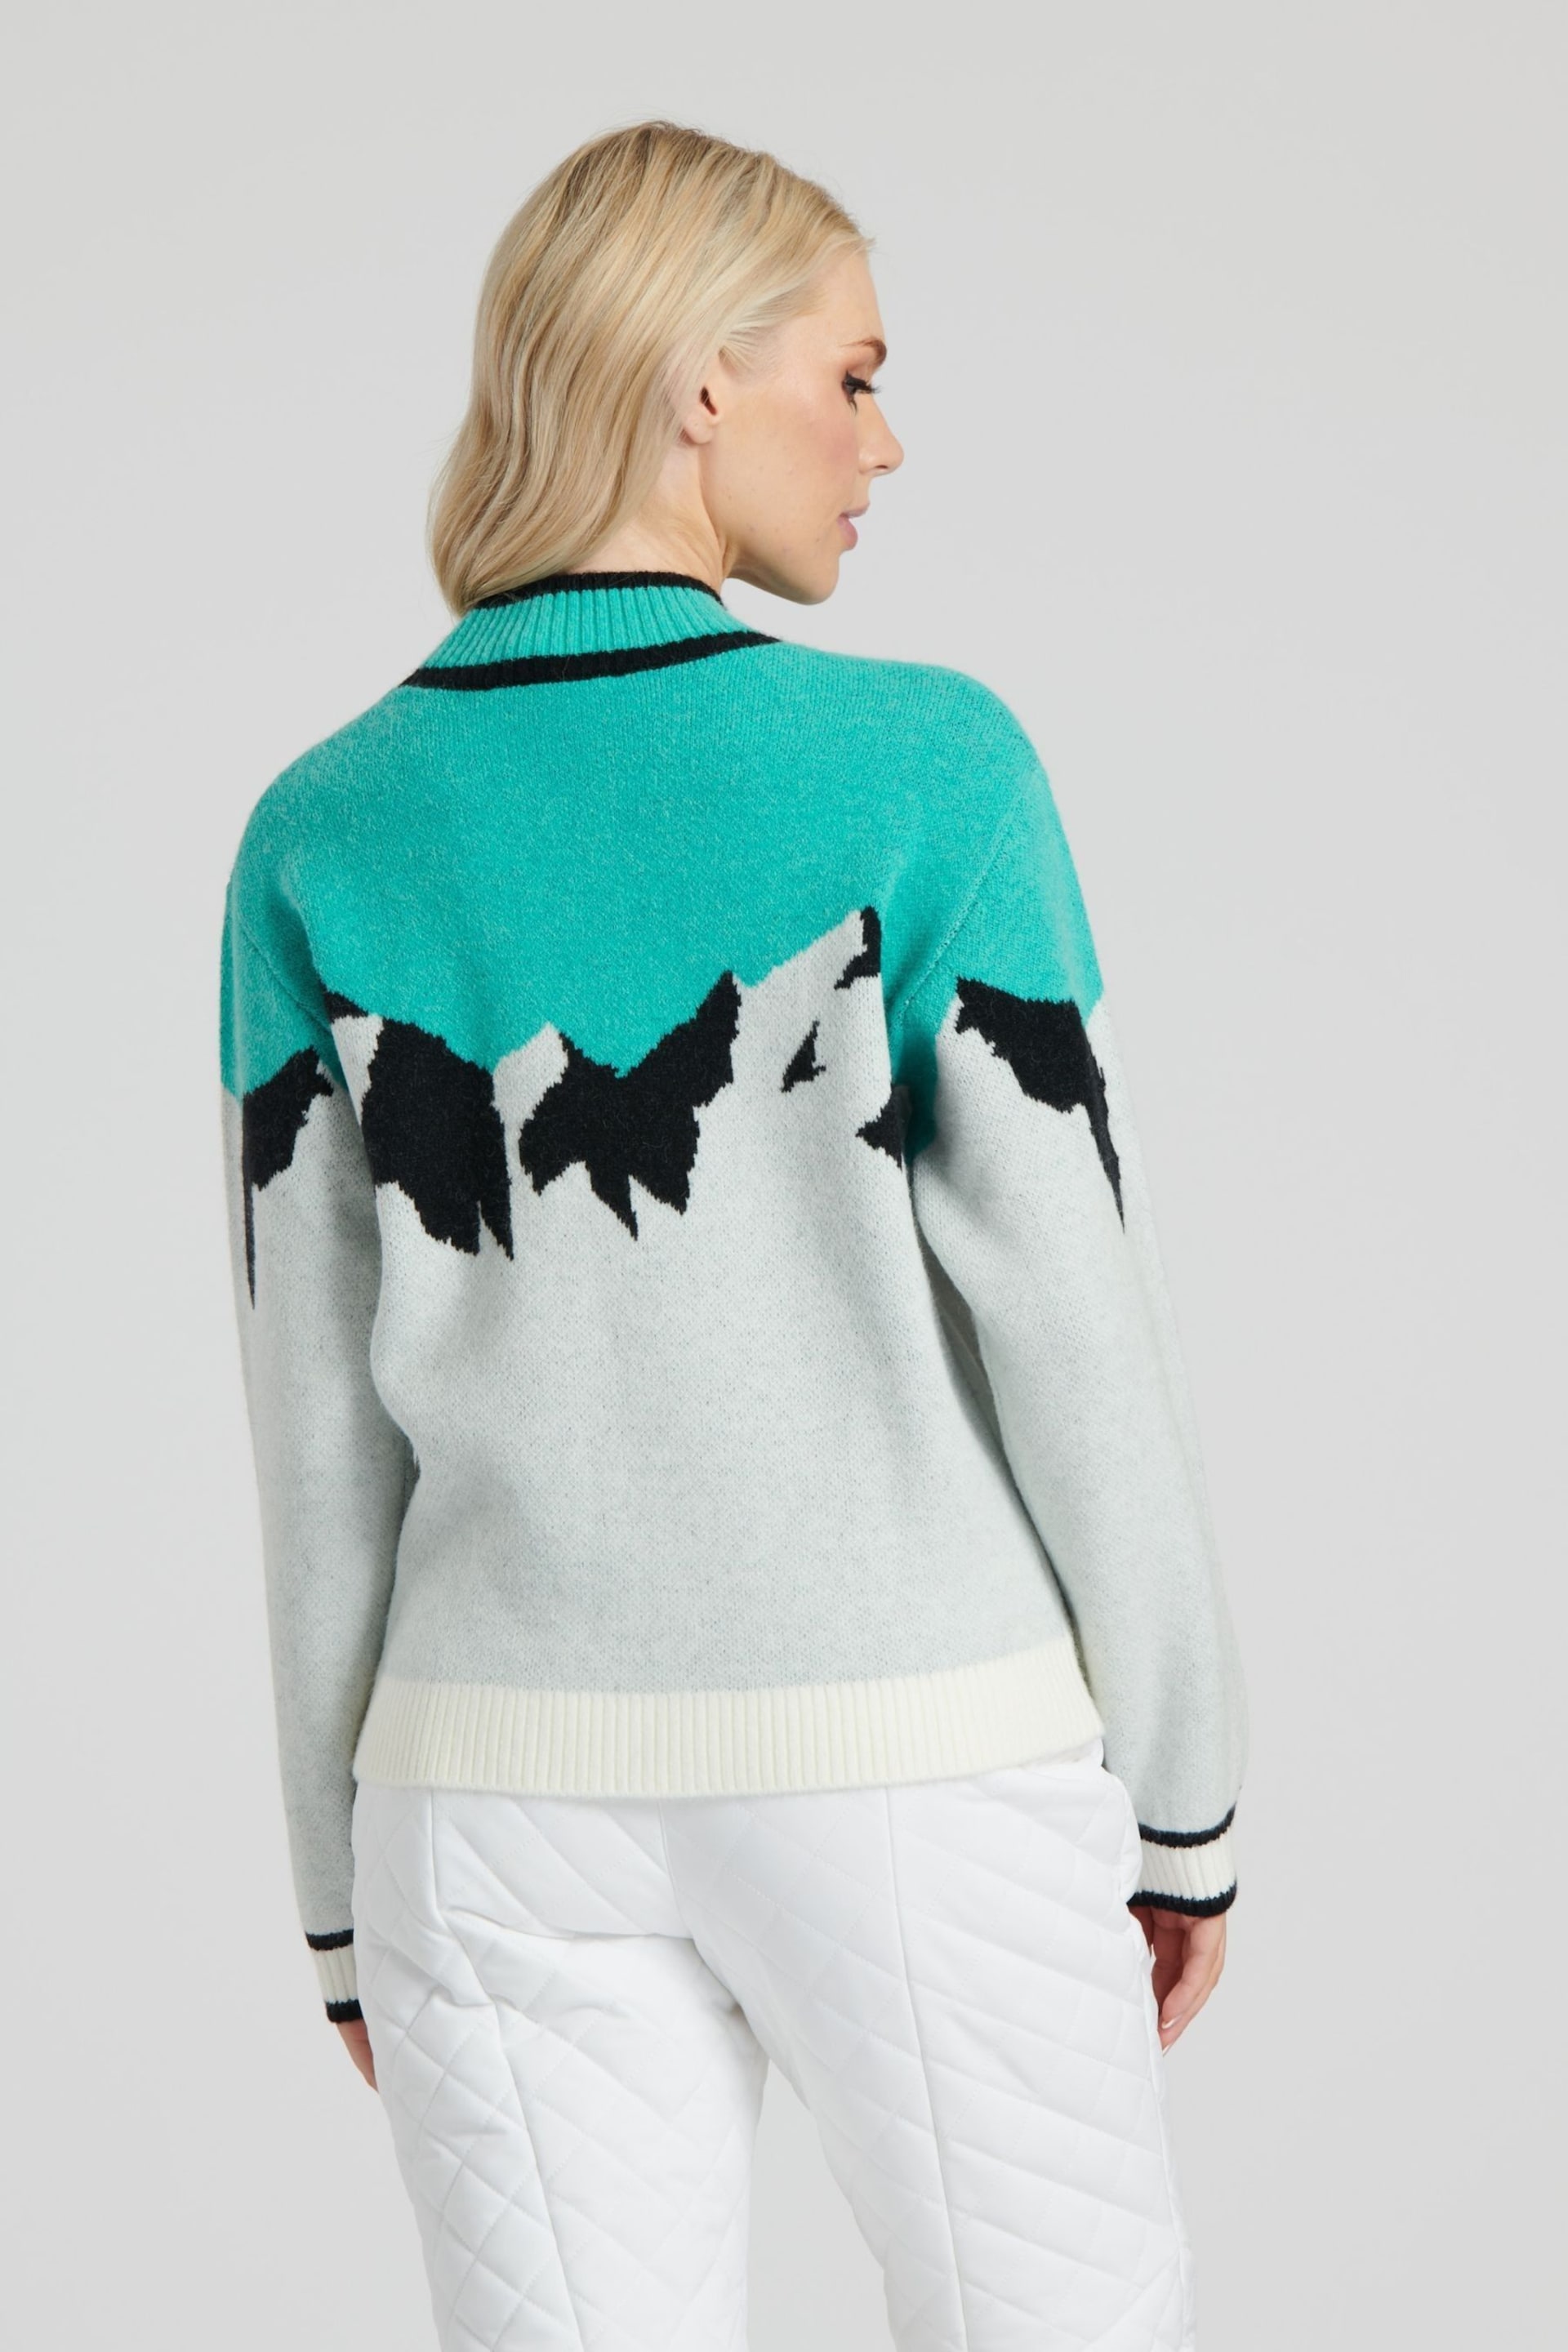 South Beach Blue Funnel Neck Knit Jumper - Image 2 of 5